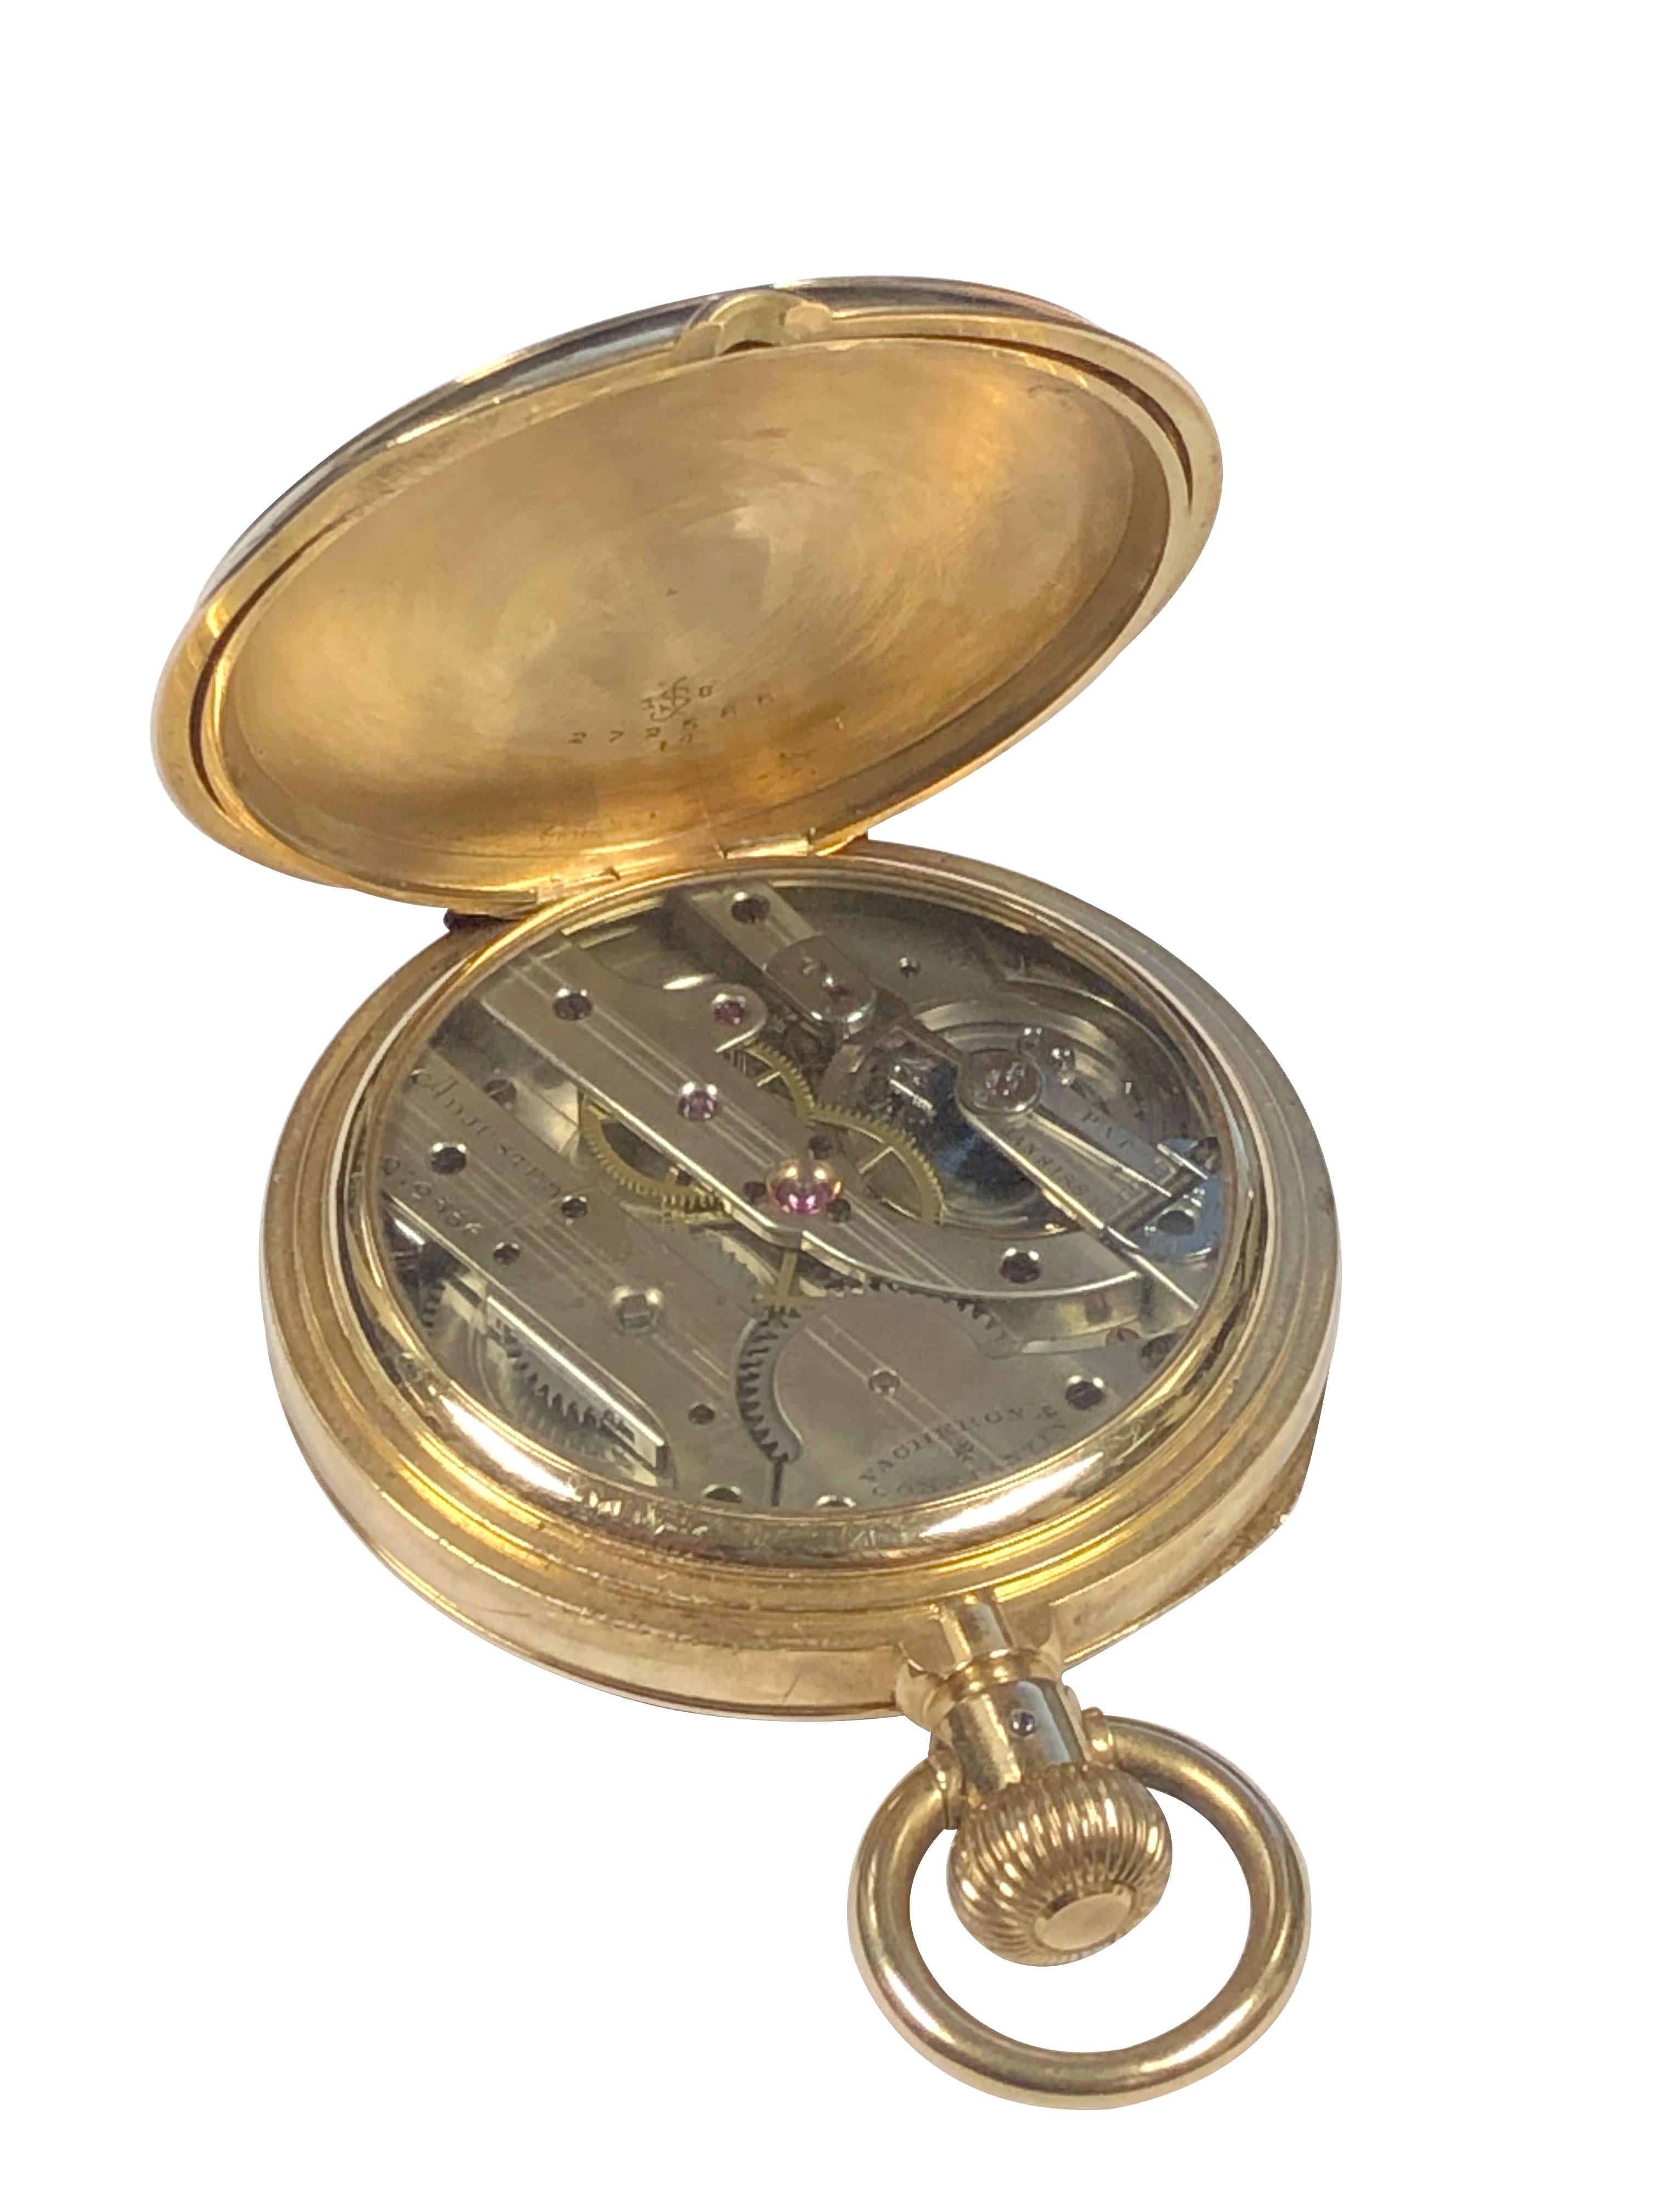 Vacheron Constantin Vintage Large 18k Gold cased Pocket Watch 1890s In Excellent Condition For Sale In Chicago, IL